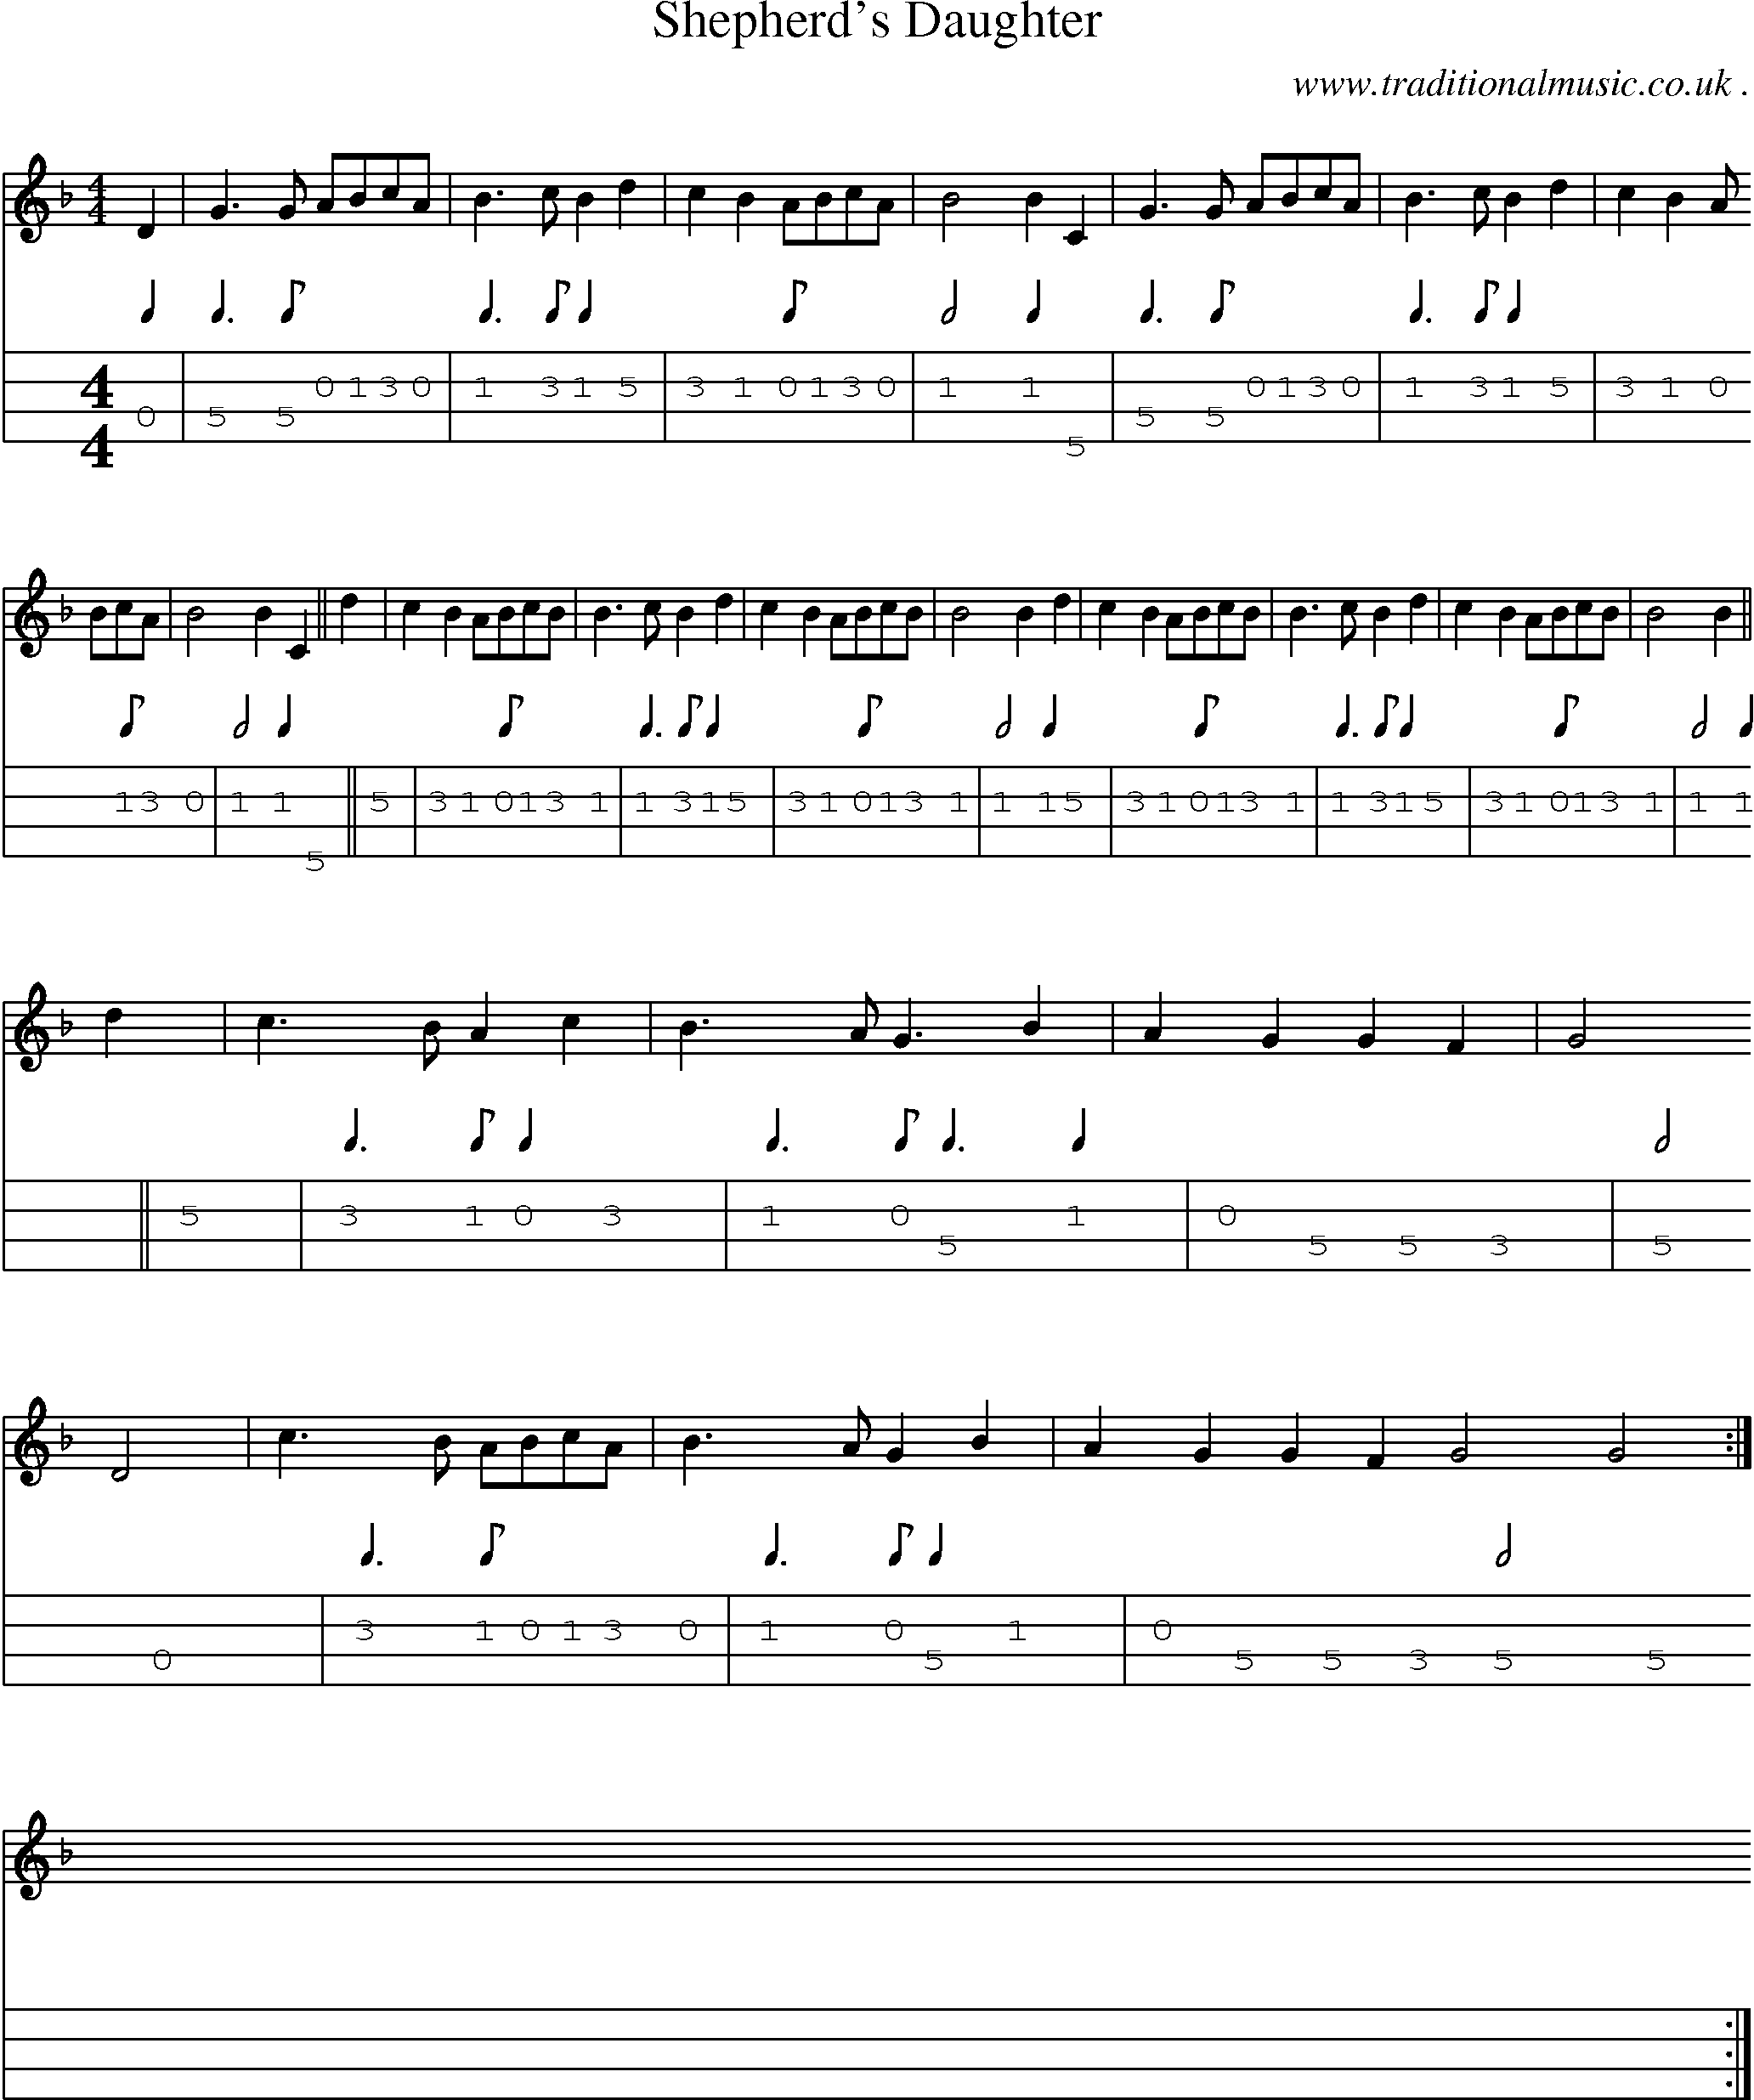 Sheet-Music and Mandolin Tabs for Shepherds Daughter